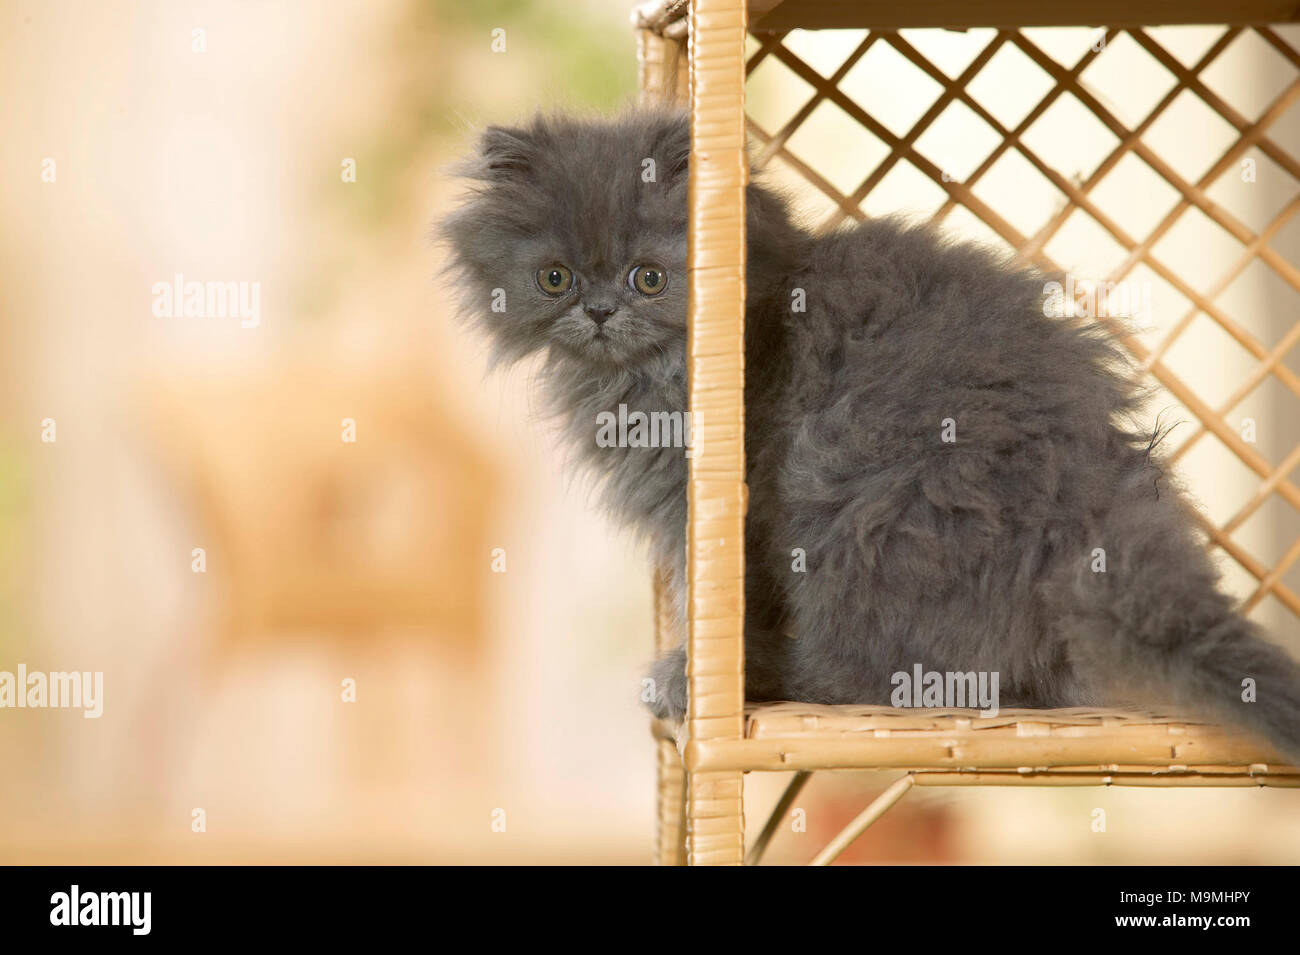 Persian Cat. Kitten sitting in a book-rack. Germany. Stock Photo